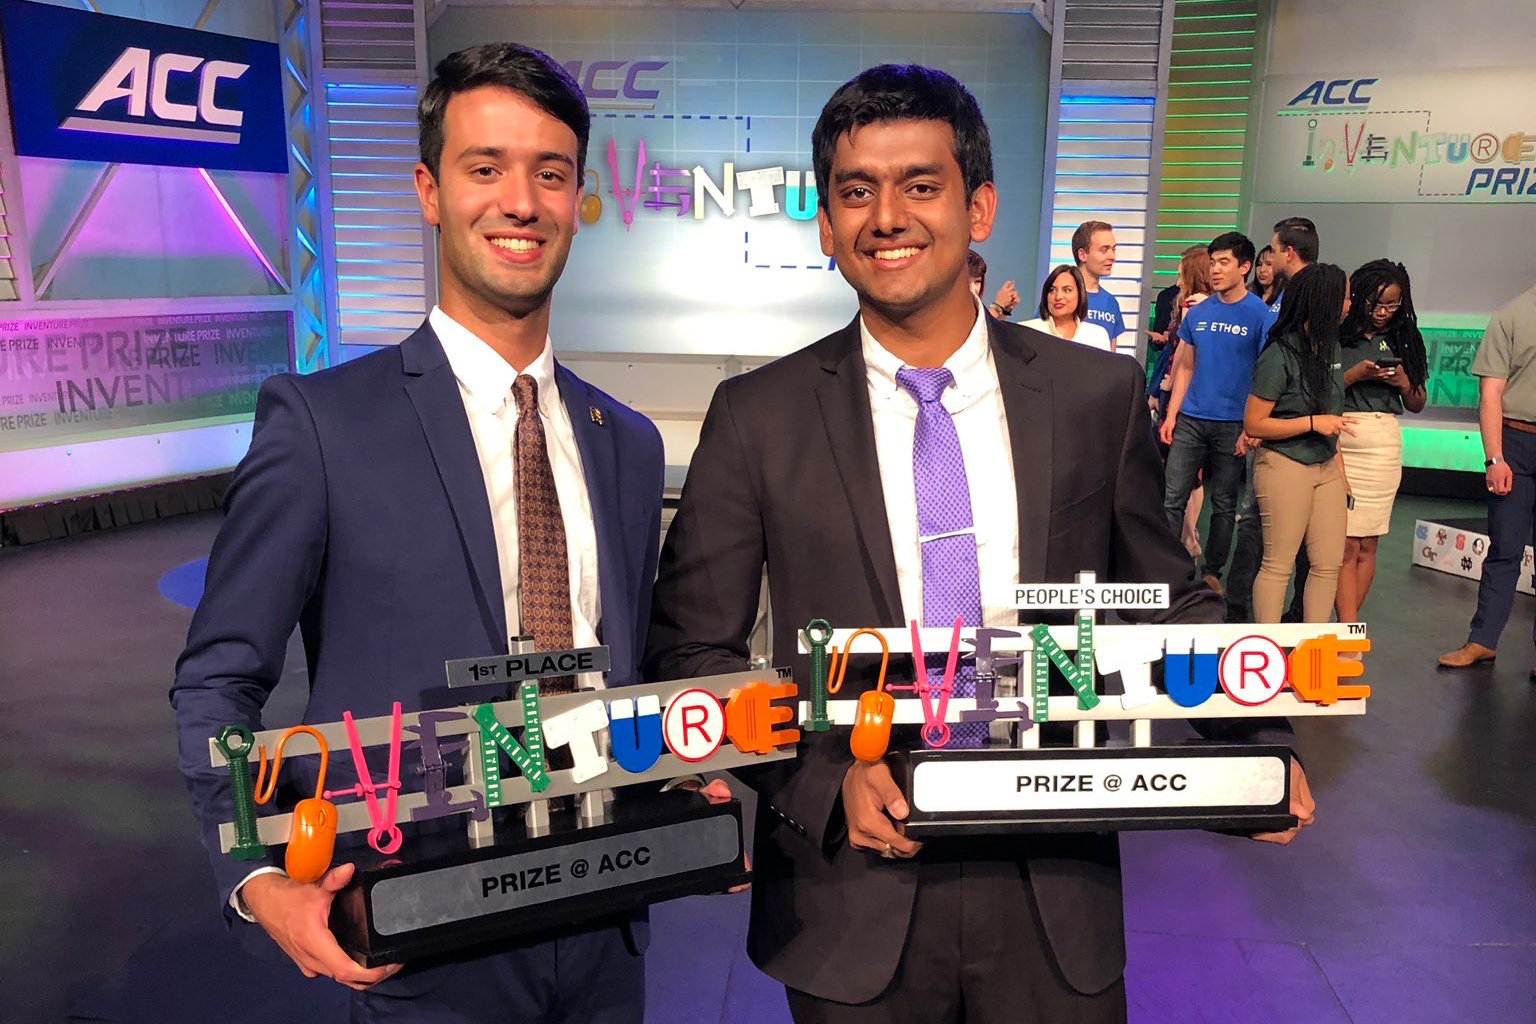 Alexander Singh and Rohit Rustagi at ACC InVenture competition holding their awards, 1st place and people's choice